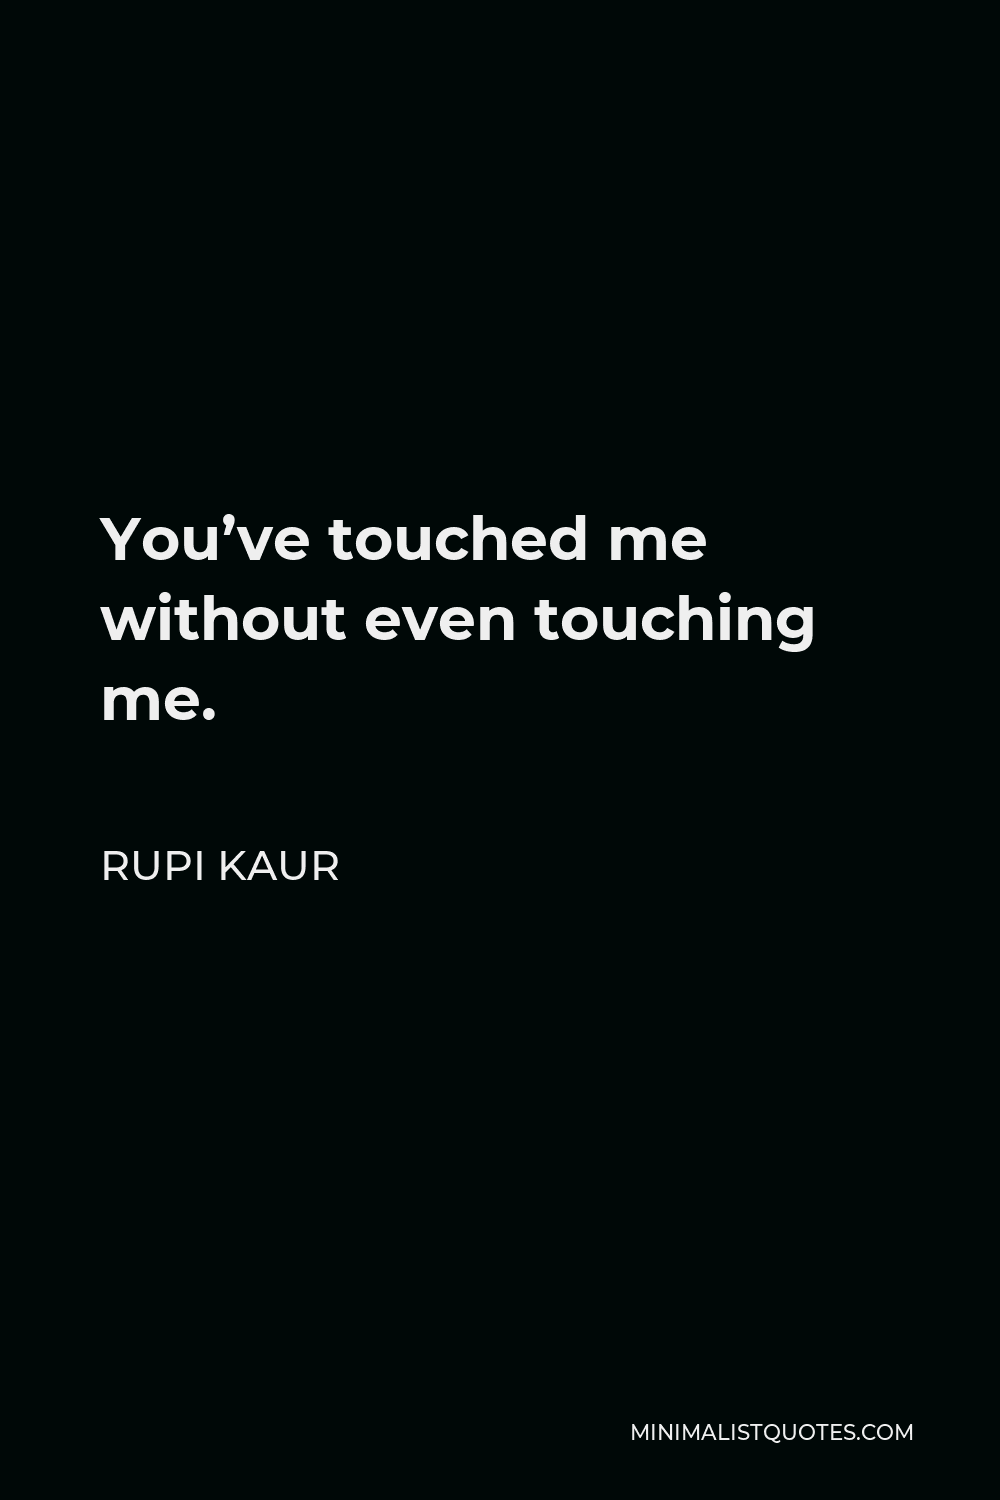 Rupi Kaur Quote - You’ve touched me without even touching me.